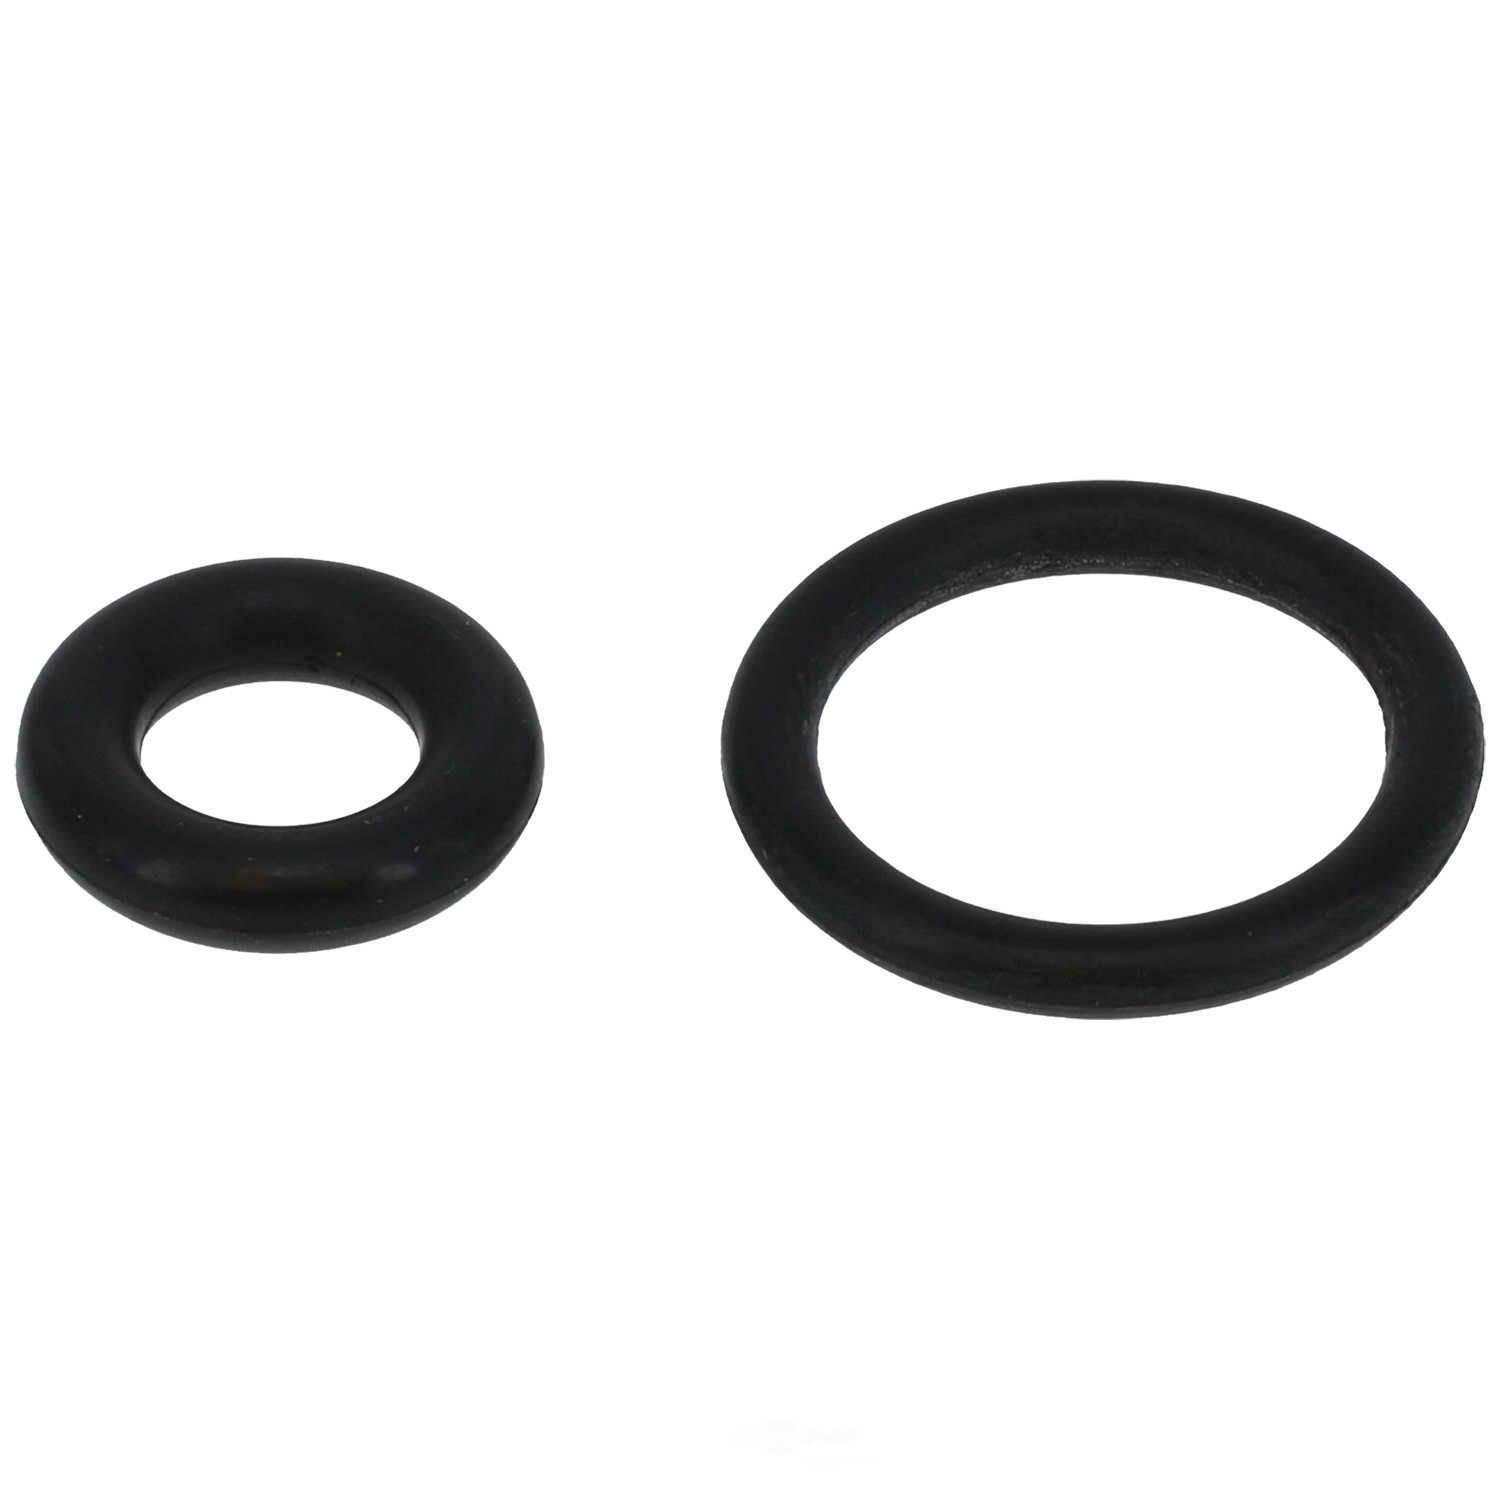 GB REMANUFACTURING INC. - Fuel Injector Seal Kit - GBR 8-022